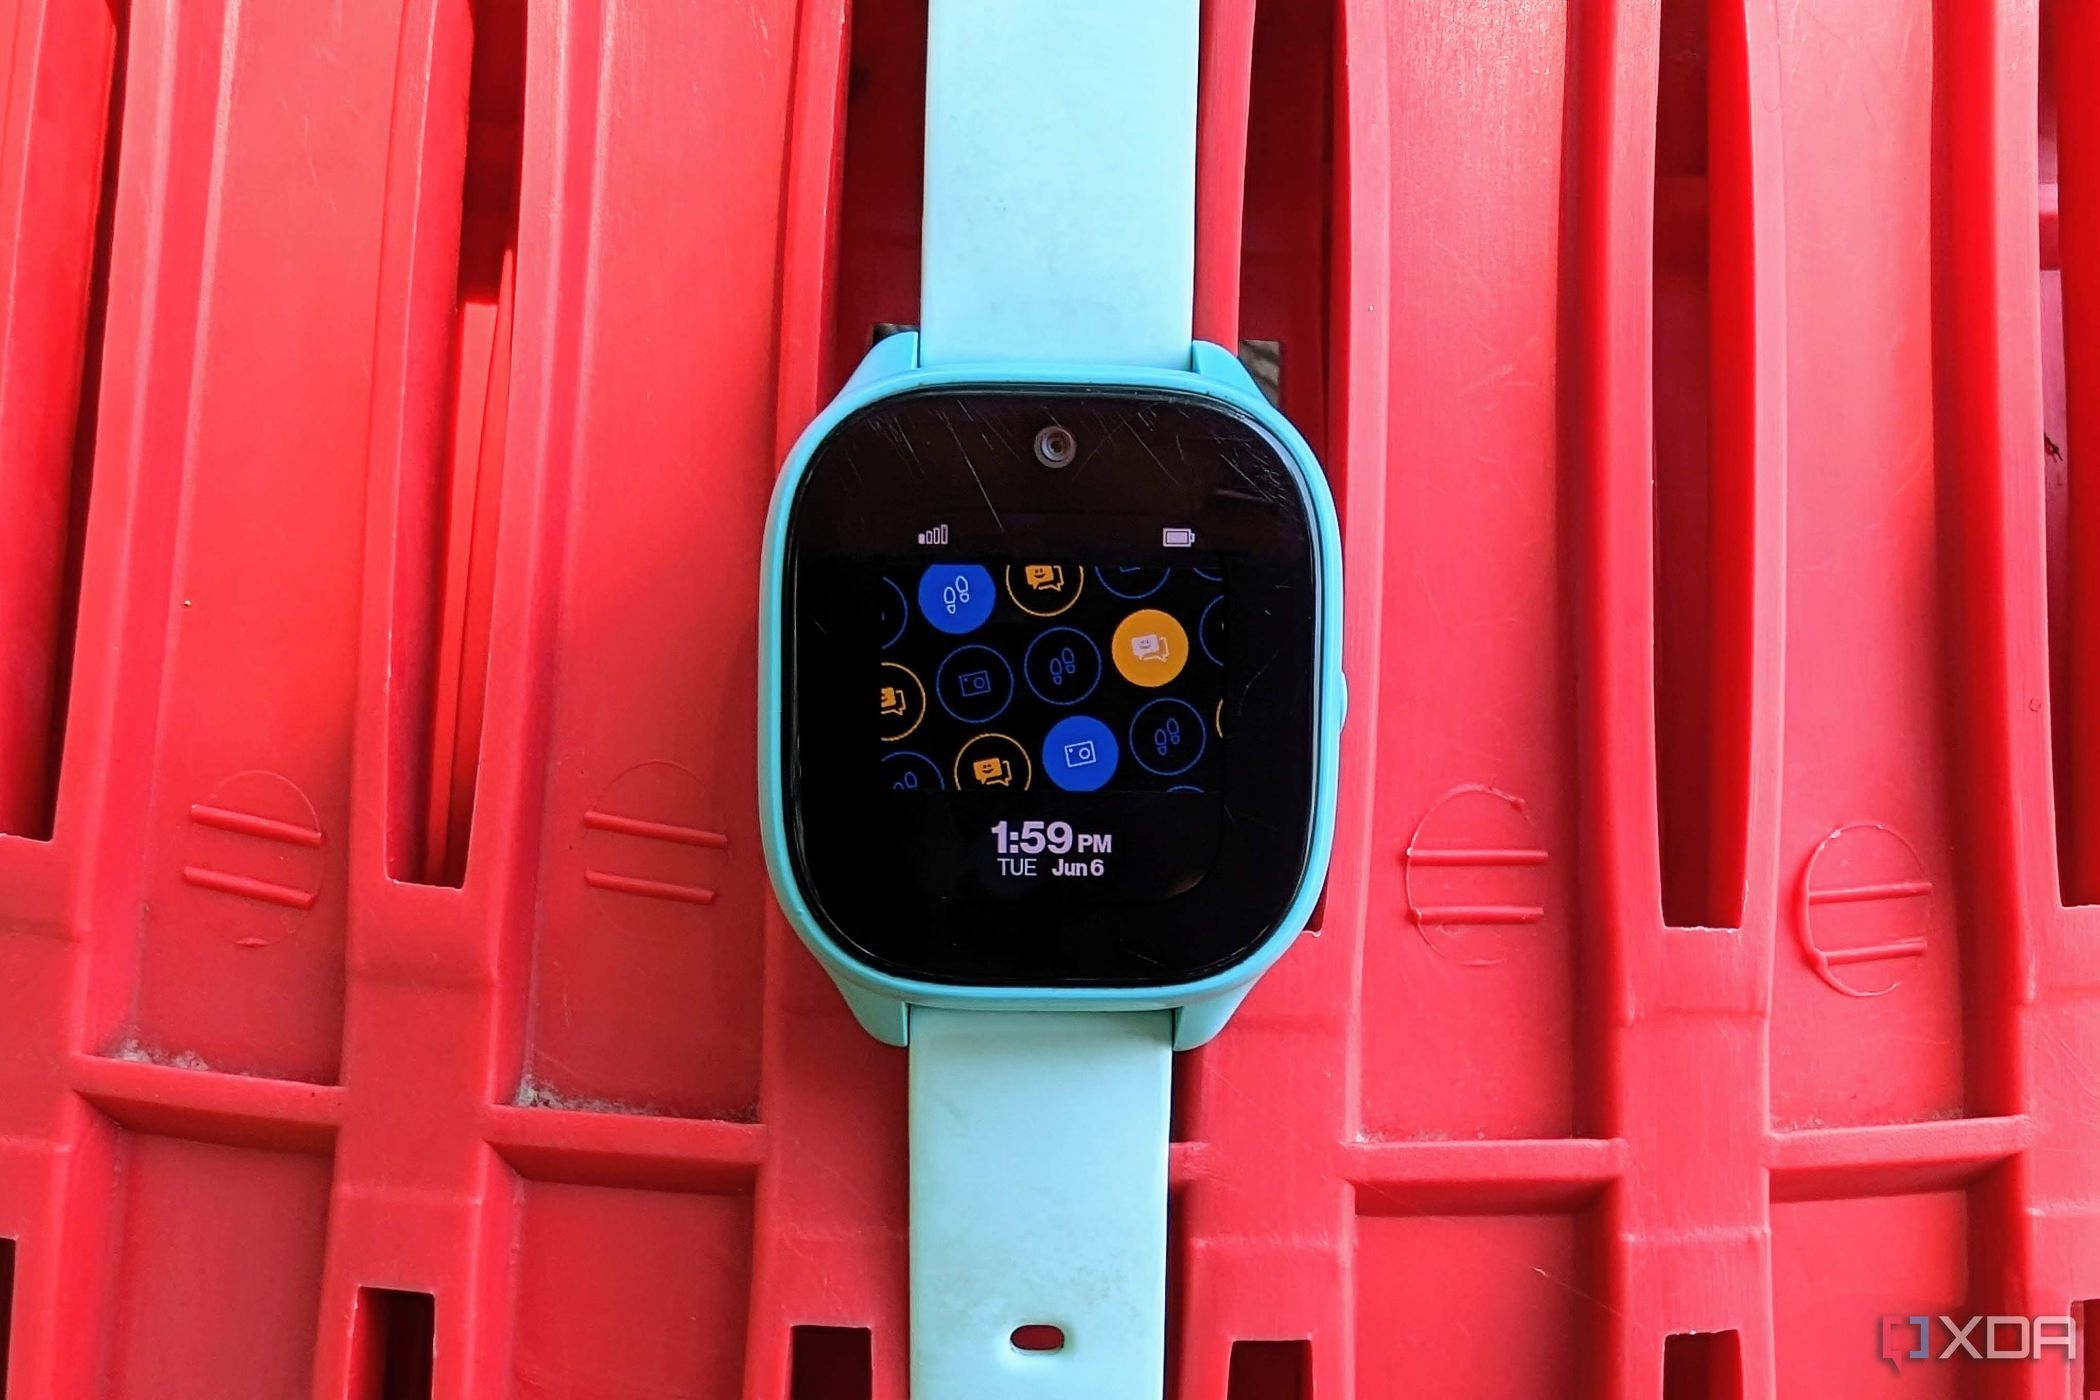 Gizmo Watch 3 kids smartwatch review: Basic and secure, with a touch of fun